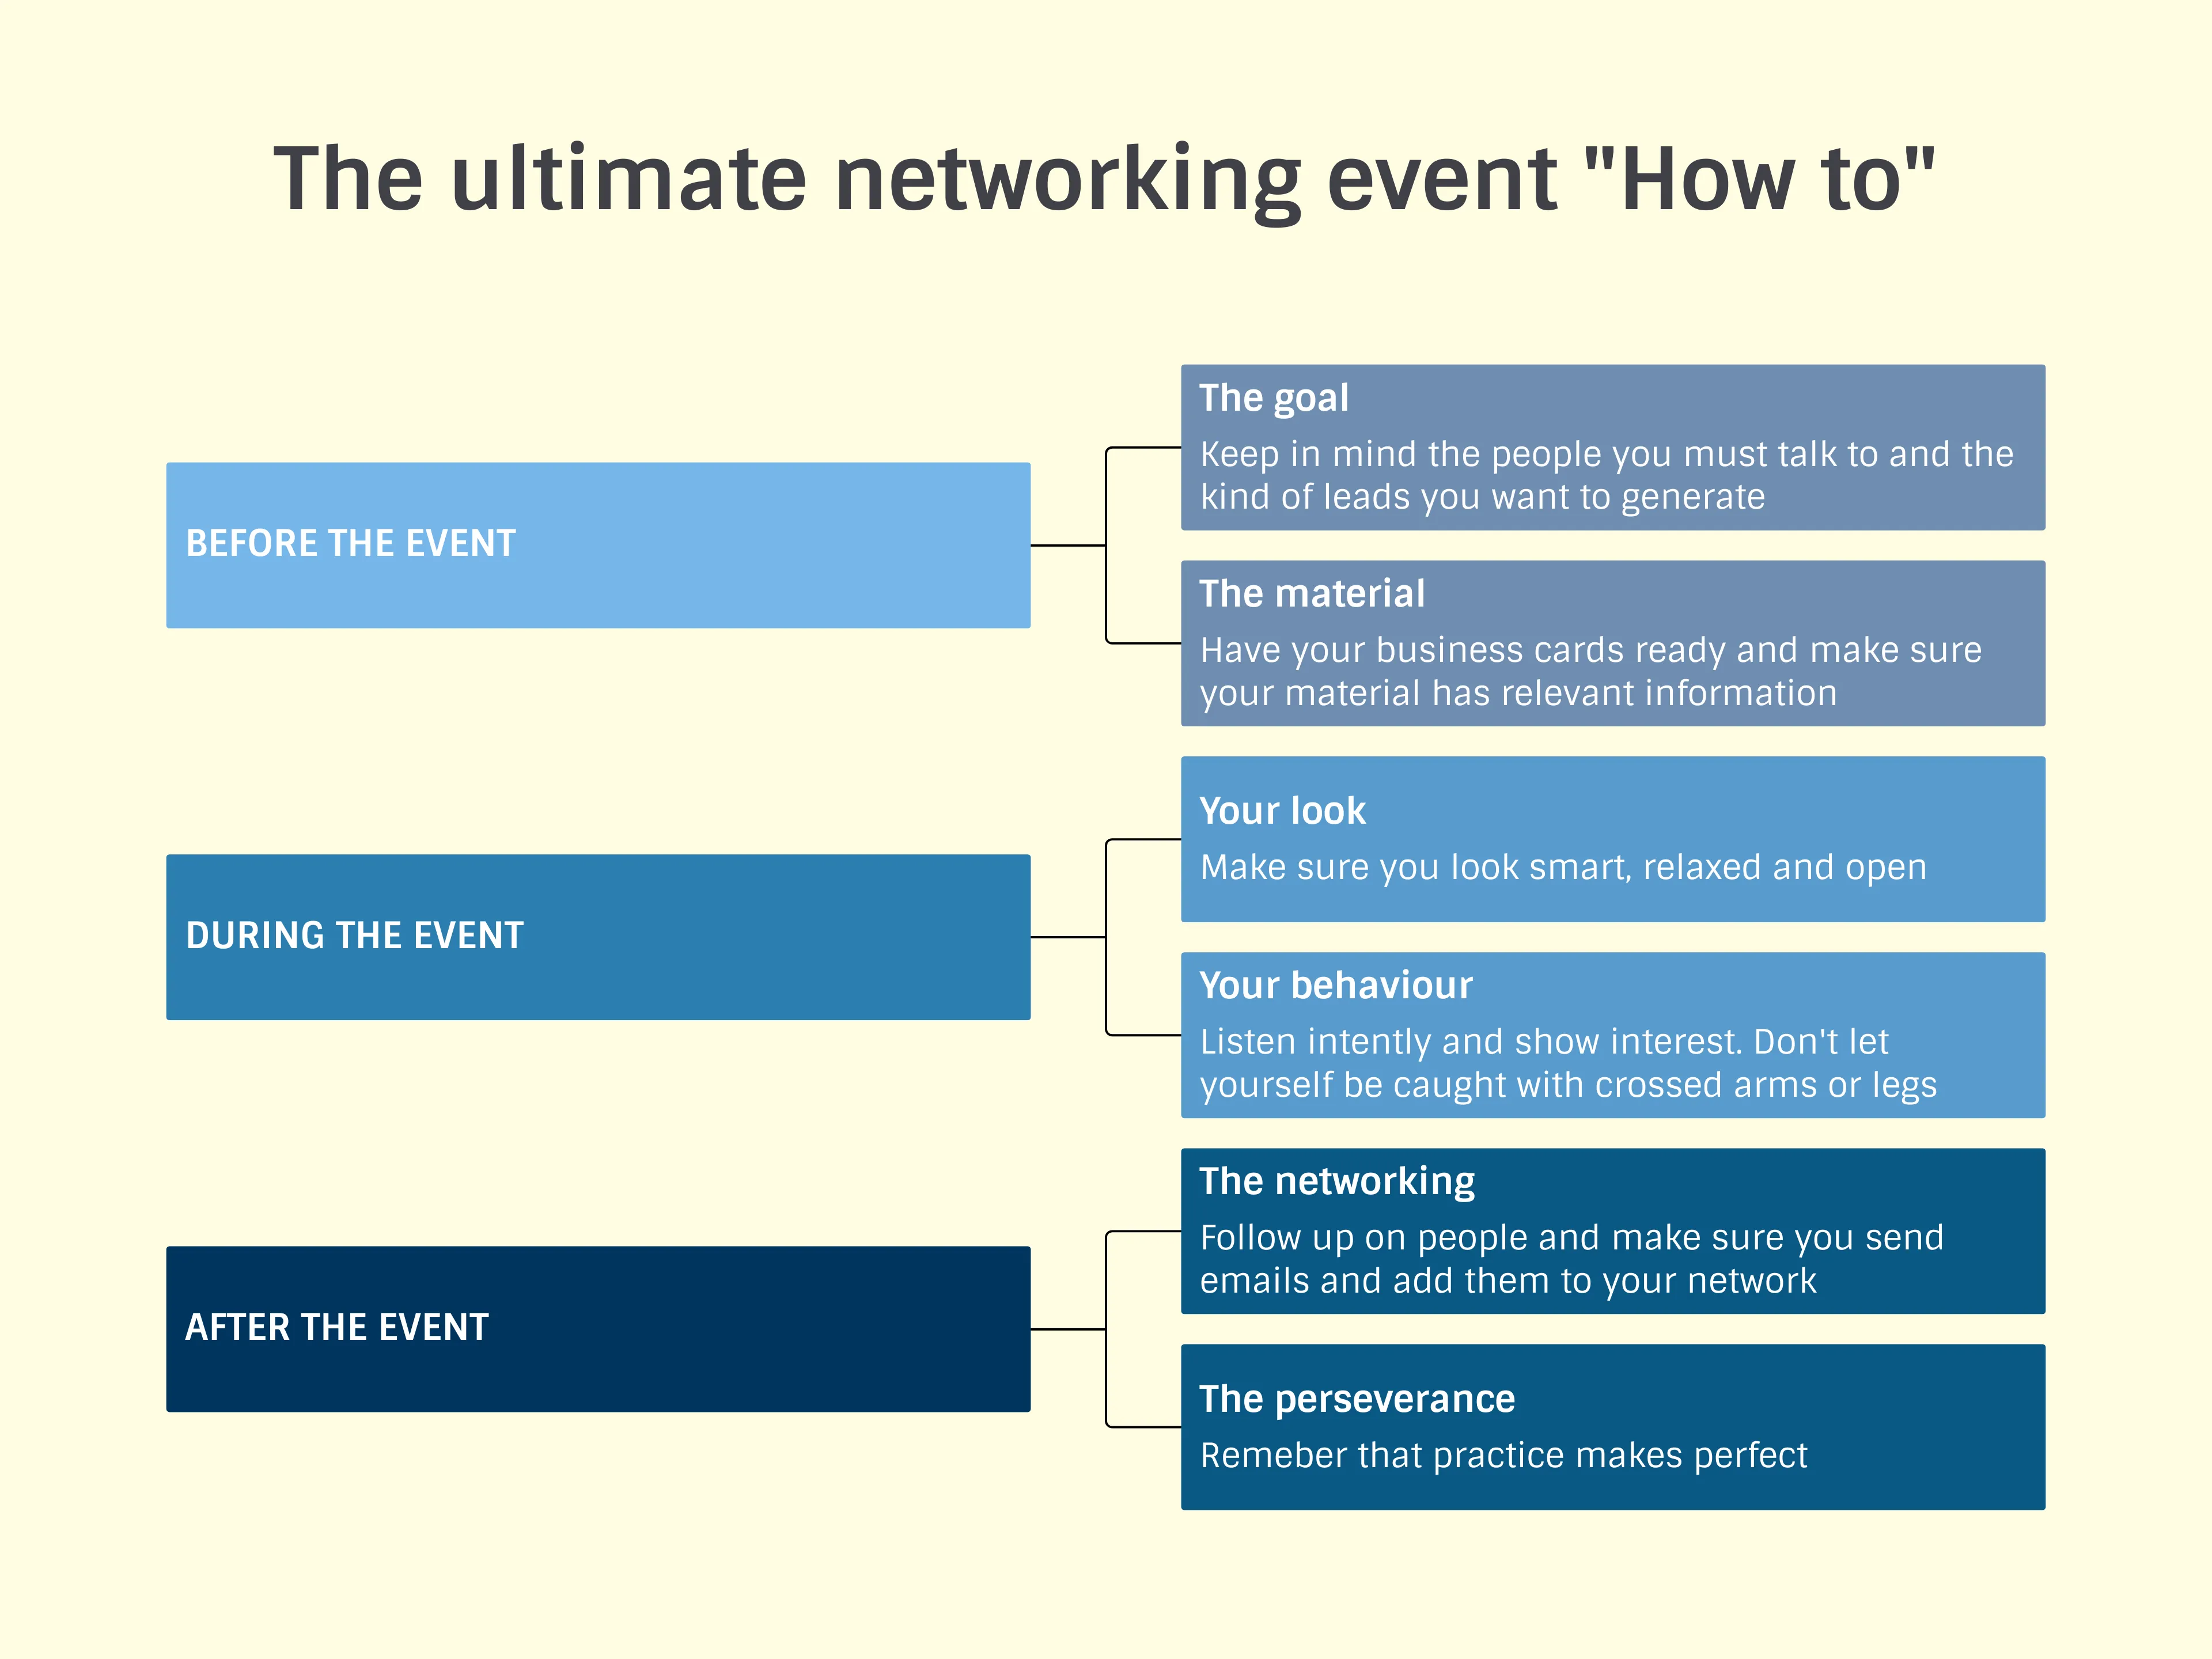 The ultimate networking event "How to"